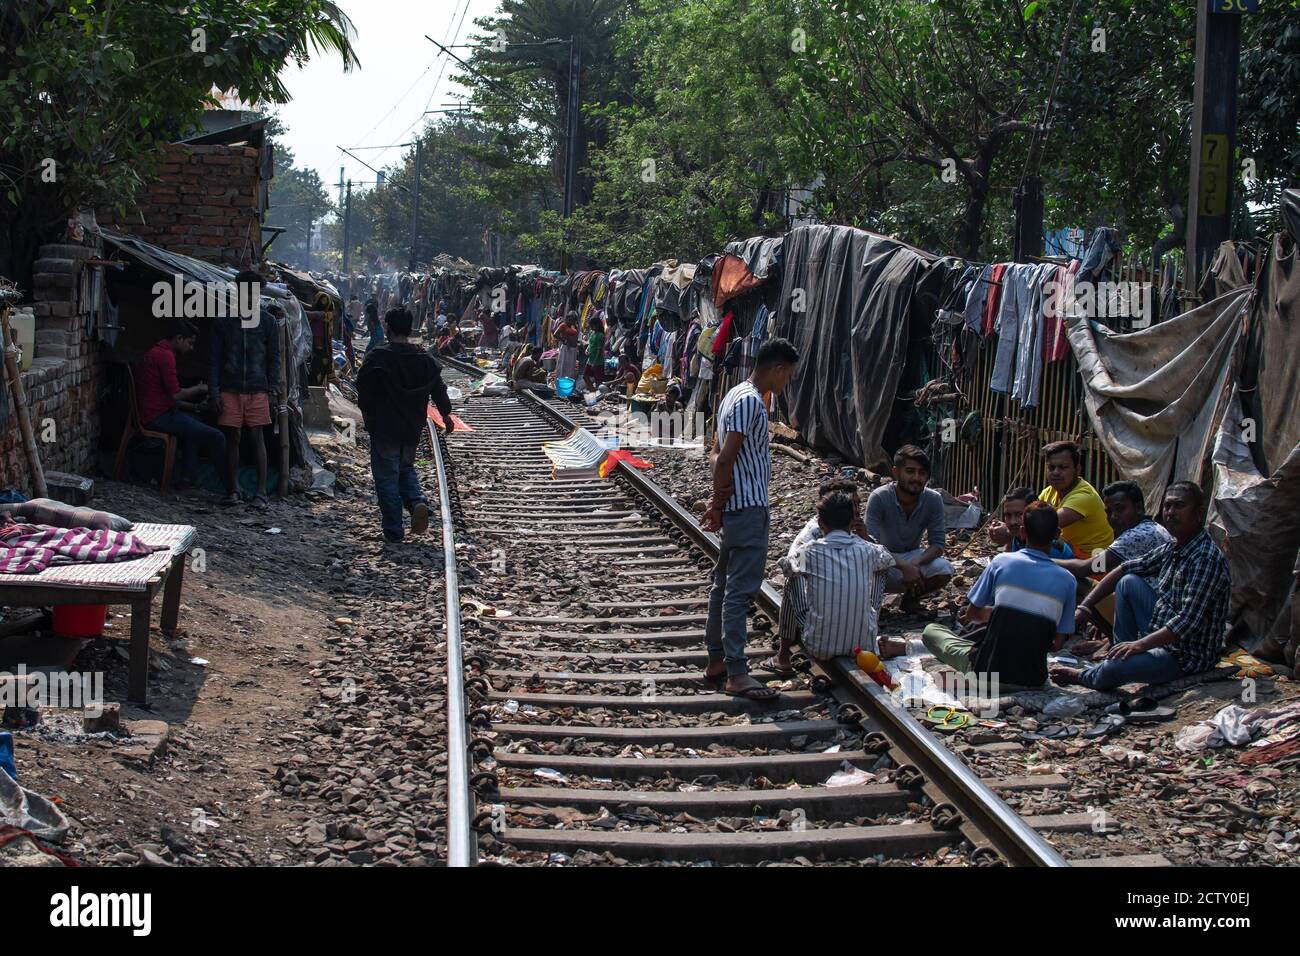 Kolkata, India - February 2, 2020: Unidentified people´s everyday life next to the active railroad in the slums on February 2, 2020 in Kolkata, India Stock Photo